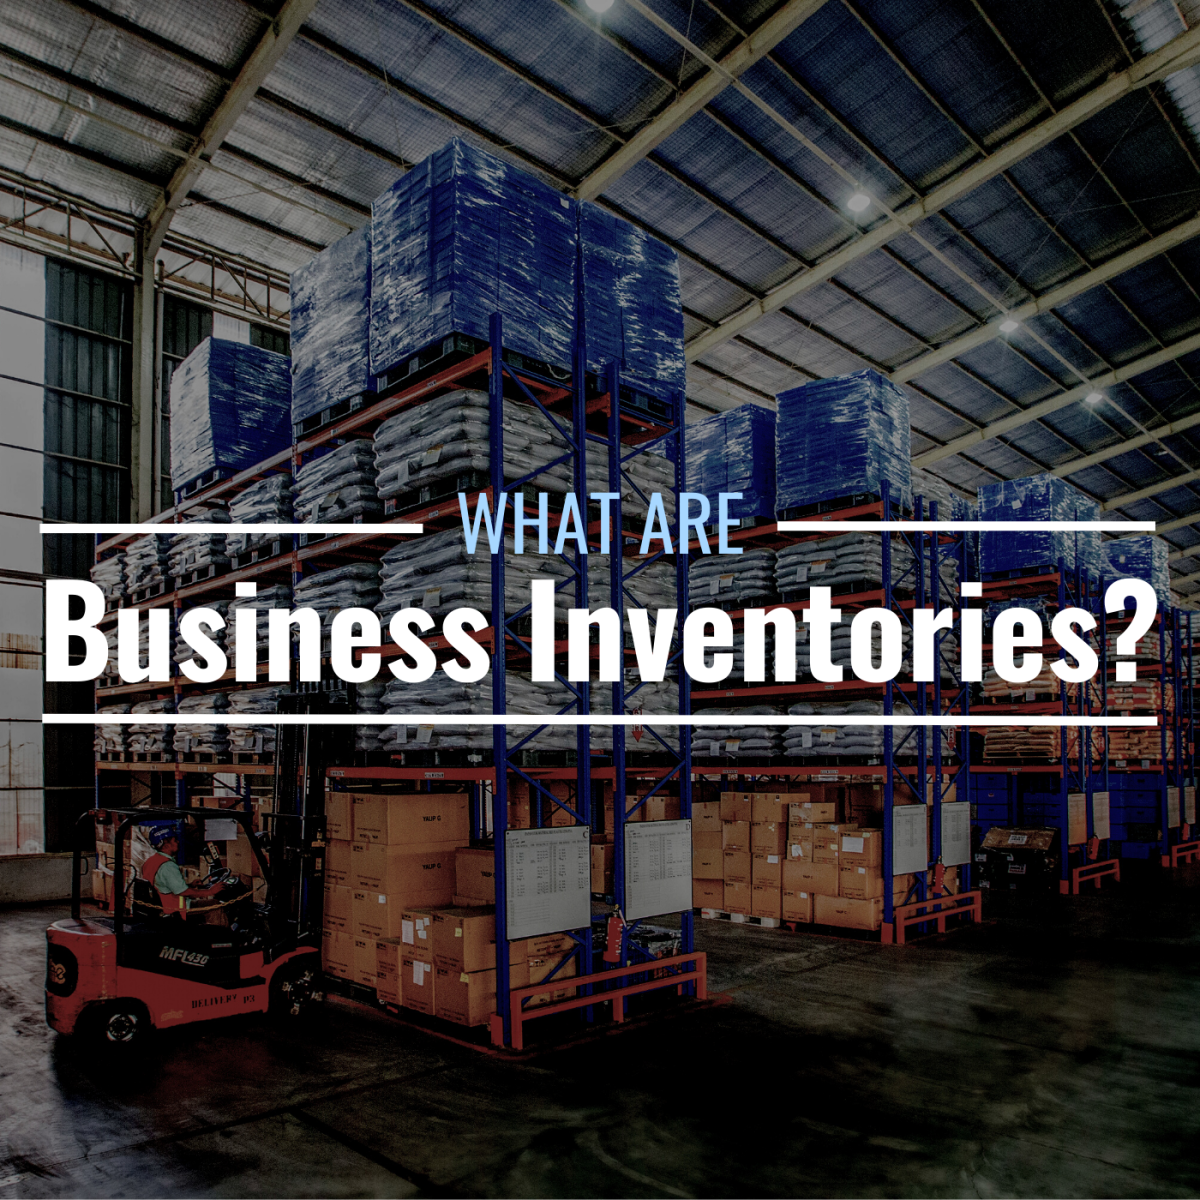 Photo of a warehouse with text overlay that reads "What Are Business Inventories?"